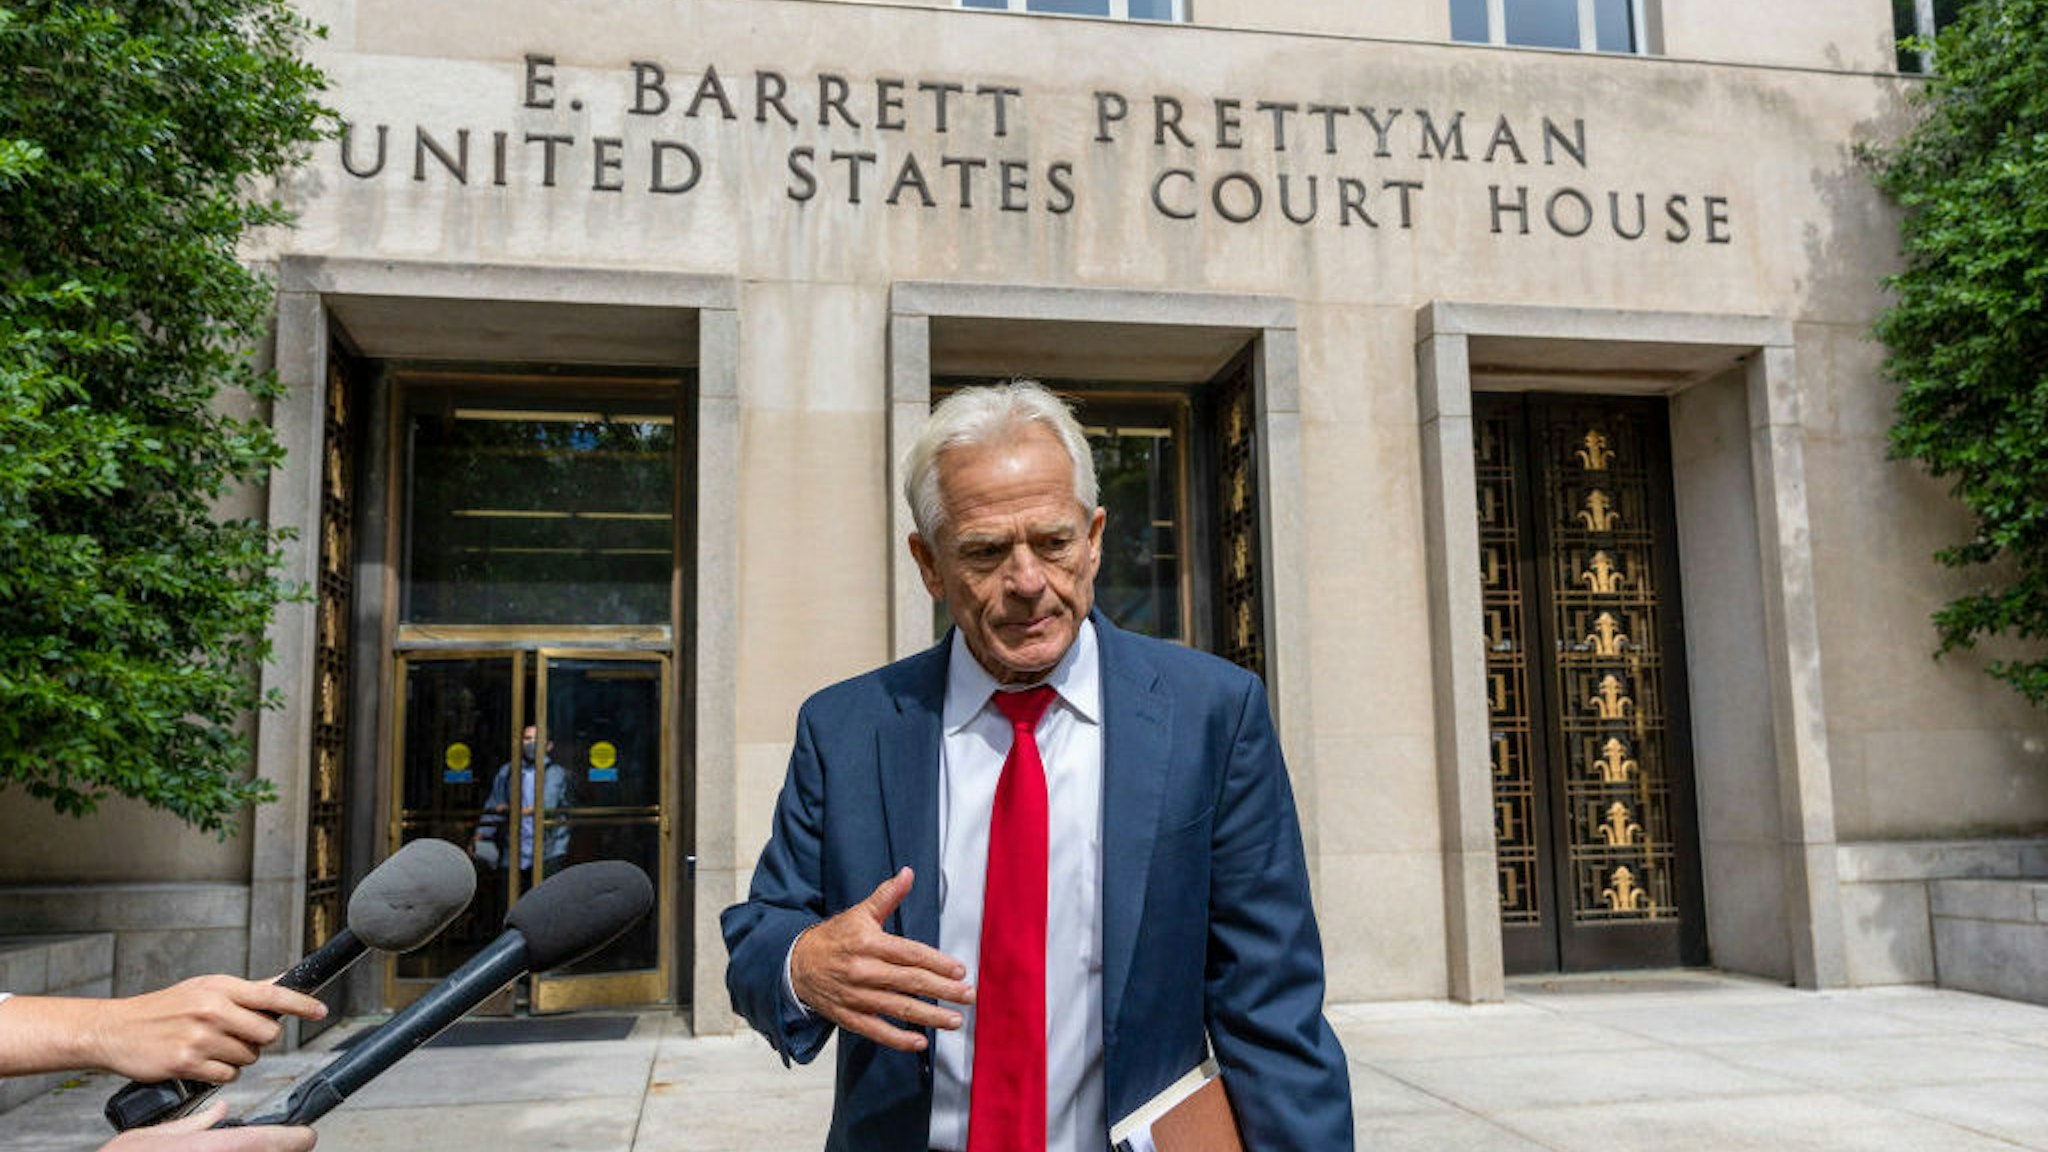 WASHINGTON, DC - JUNE 03: Peter Navarro talks to reporters after his hearing in federal court on June 03, 2022 in Washington, DC. A federal grand jury indicted former Trump White House adviser Peter Navarro for contempt of Congress after refusing to cooperate with the House January 6 Committee’s investigation. (Photo by Tasos Katopodis/Getty Images)